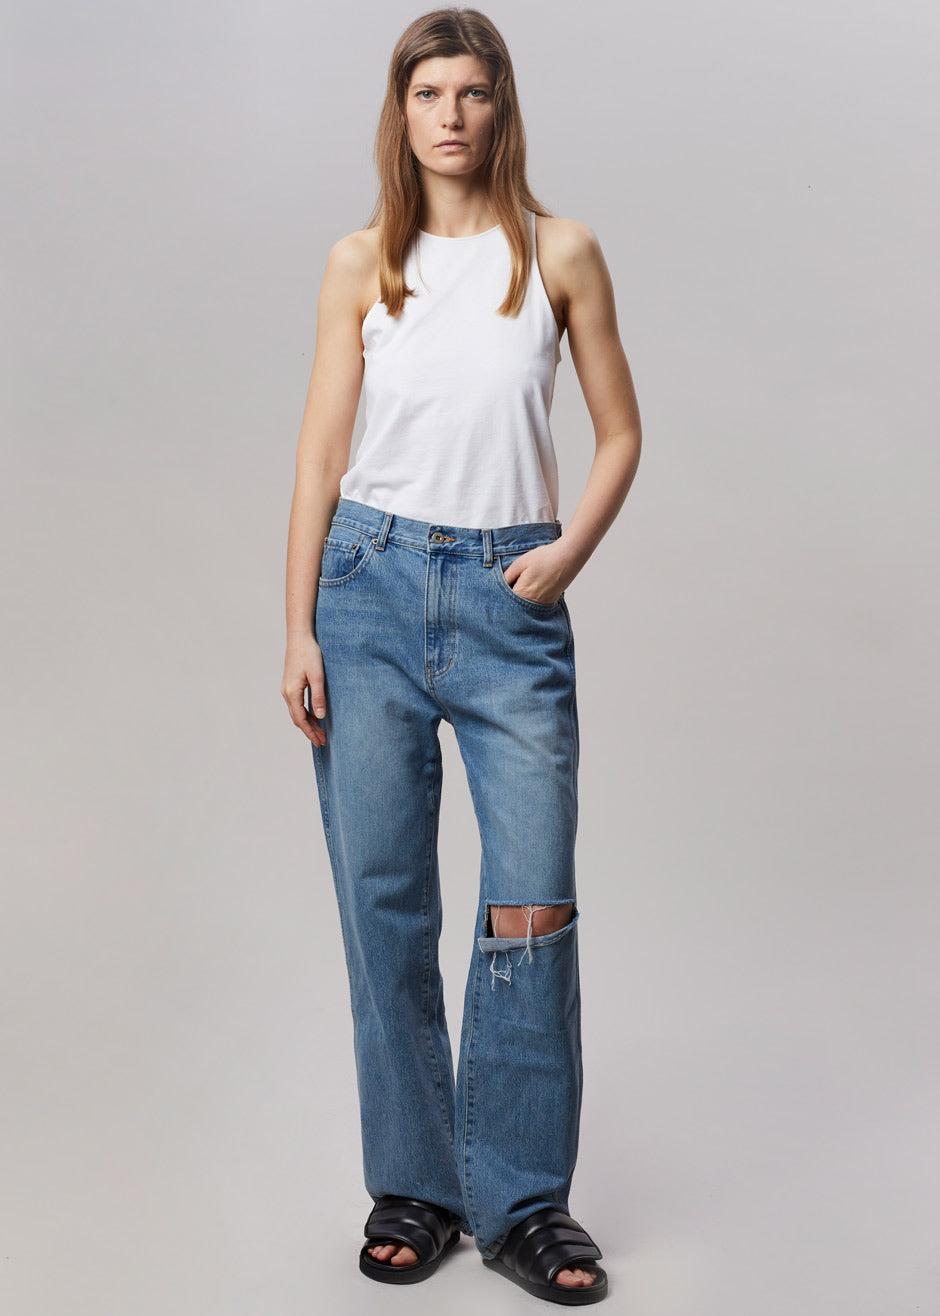 Laon Ripped Jeans - Worn Wash - 1